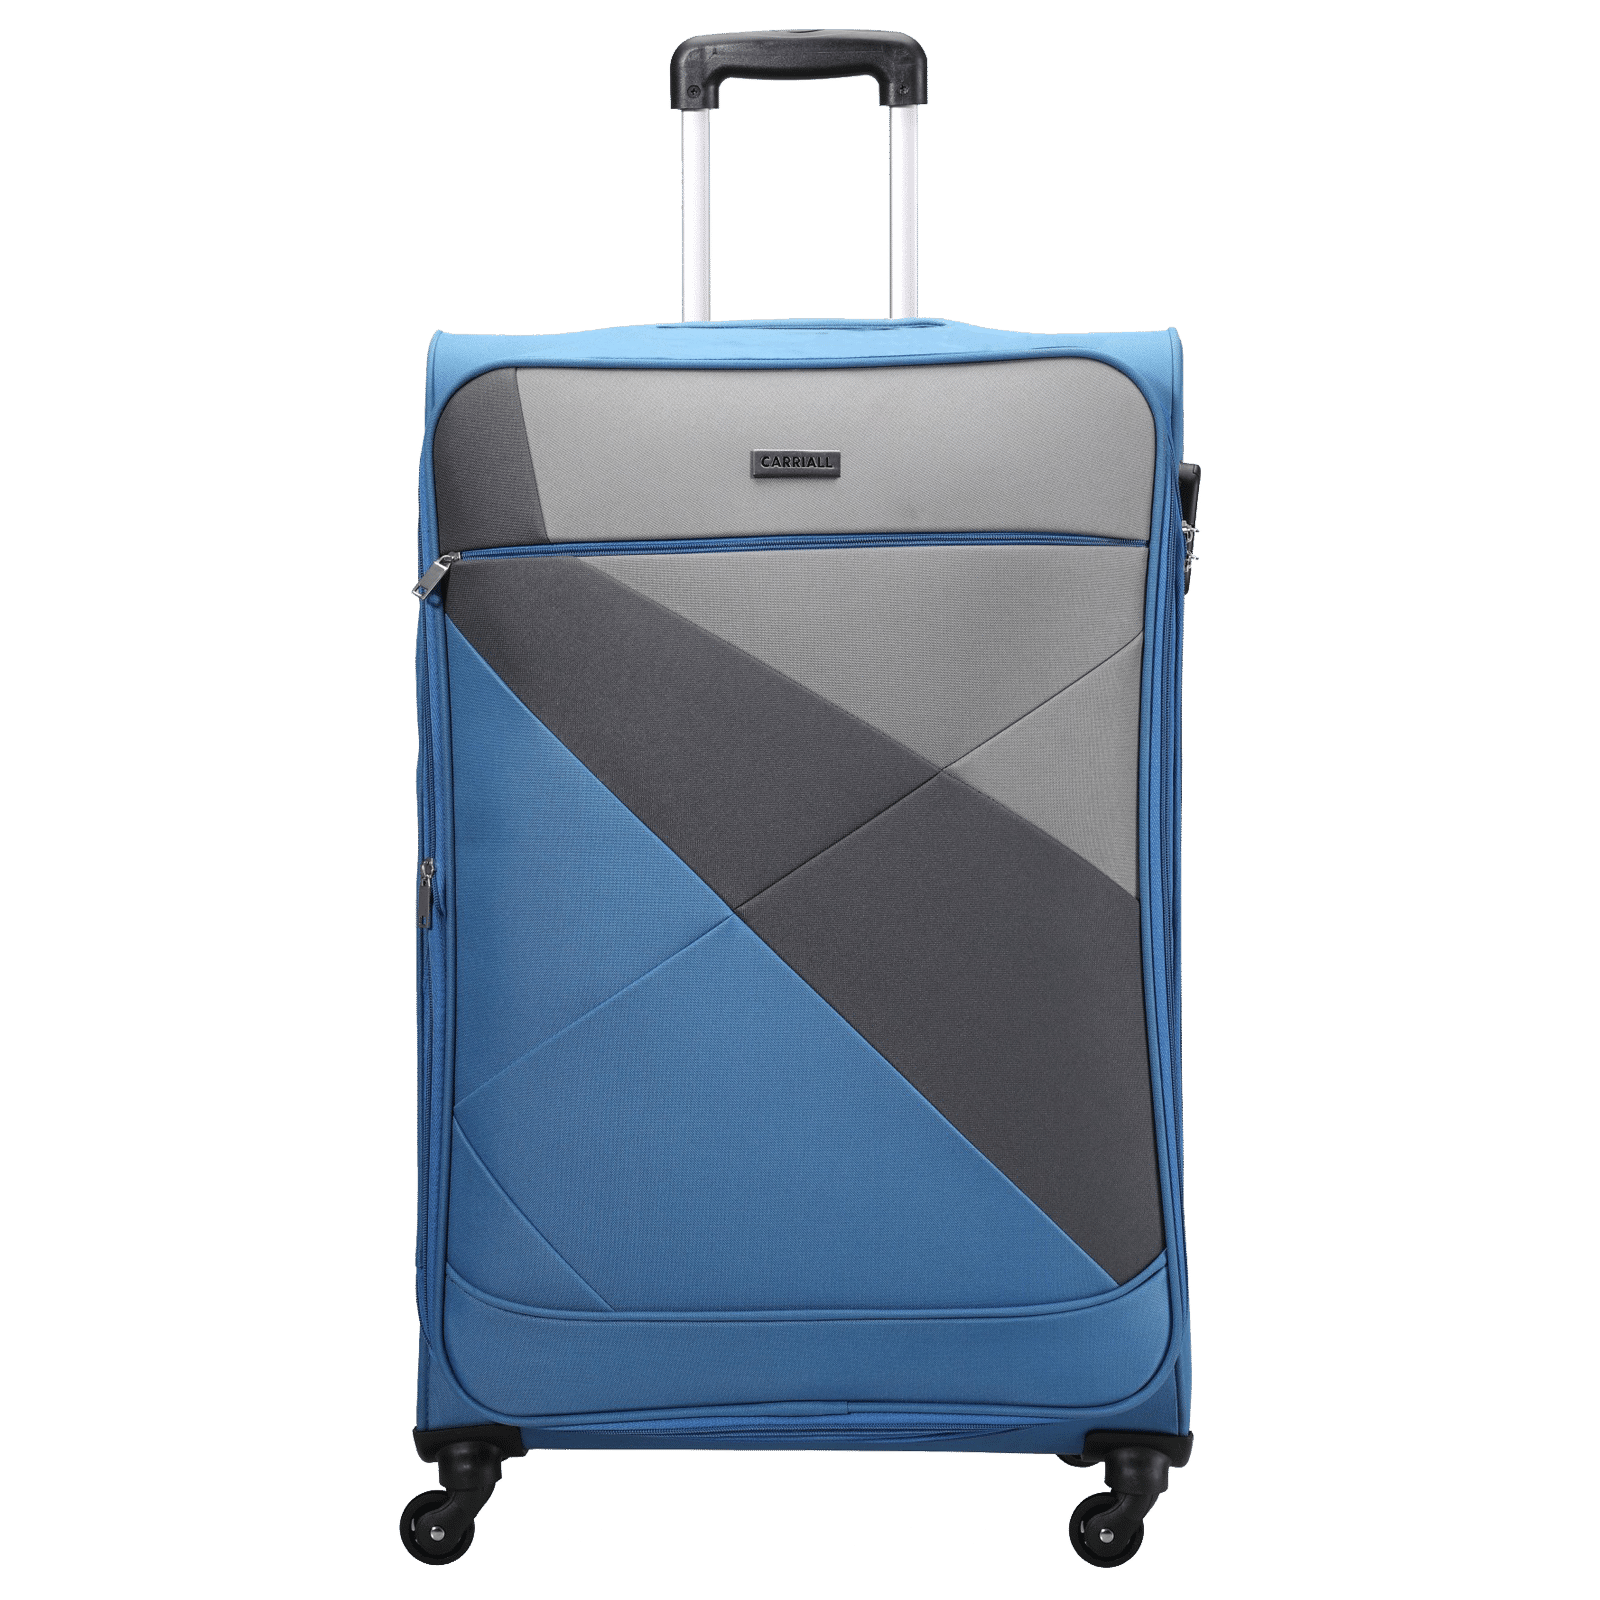 American Tourister Prague Purple Trolley Bag Suitcase with Wheels Combo Set  of 3 Sizes : Amazon.in: Fashion